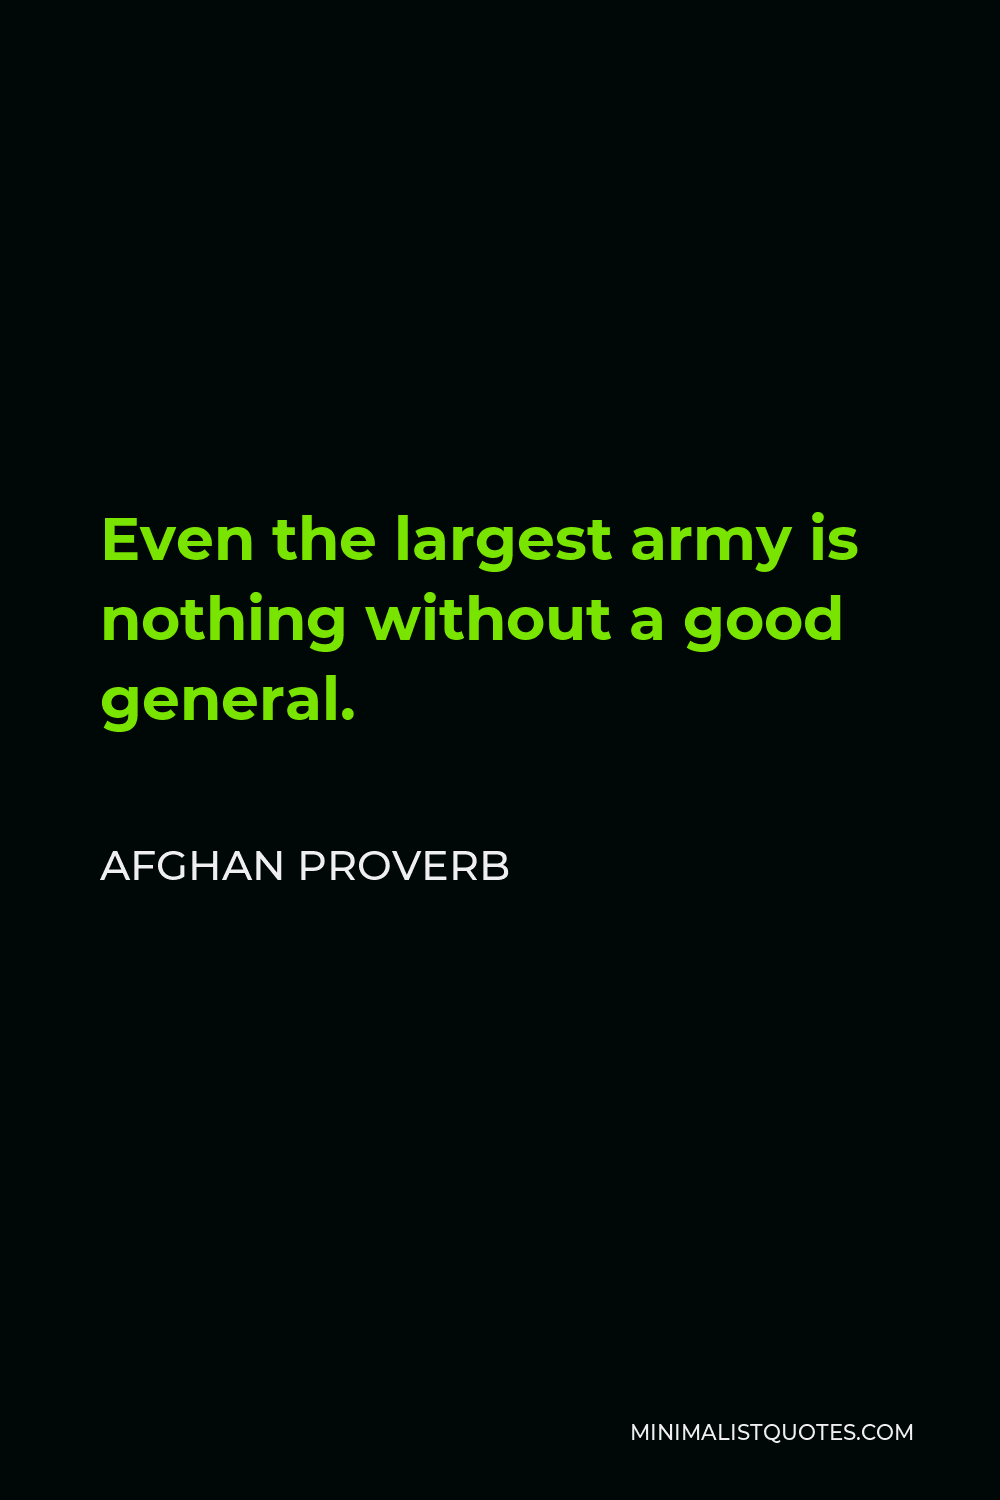 Afghan Proverb Quote - Even the largest army is nothing without a good general.